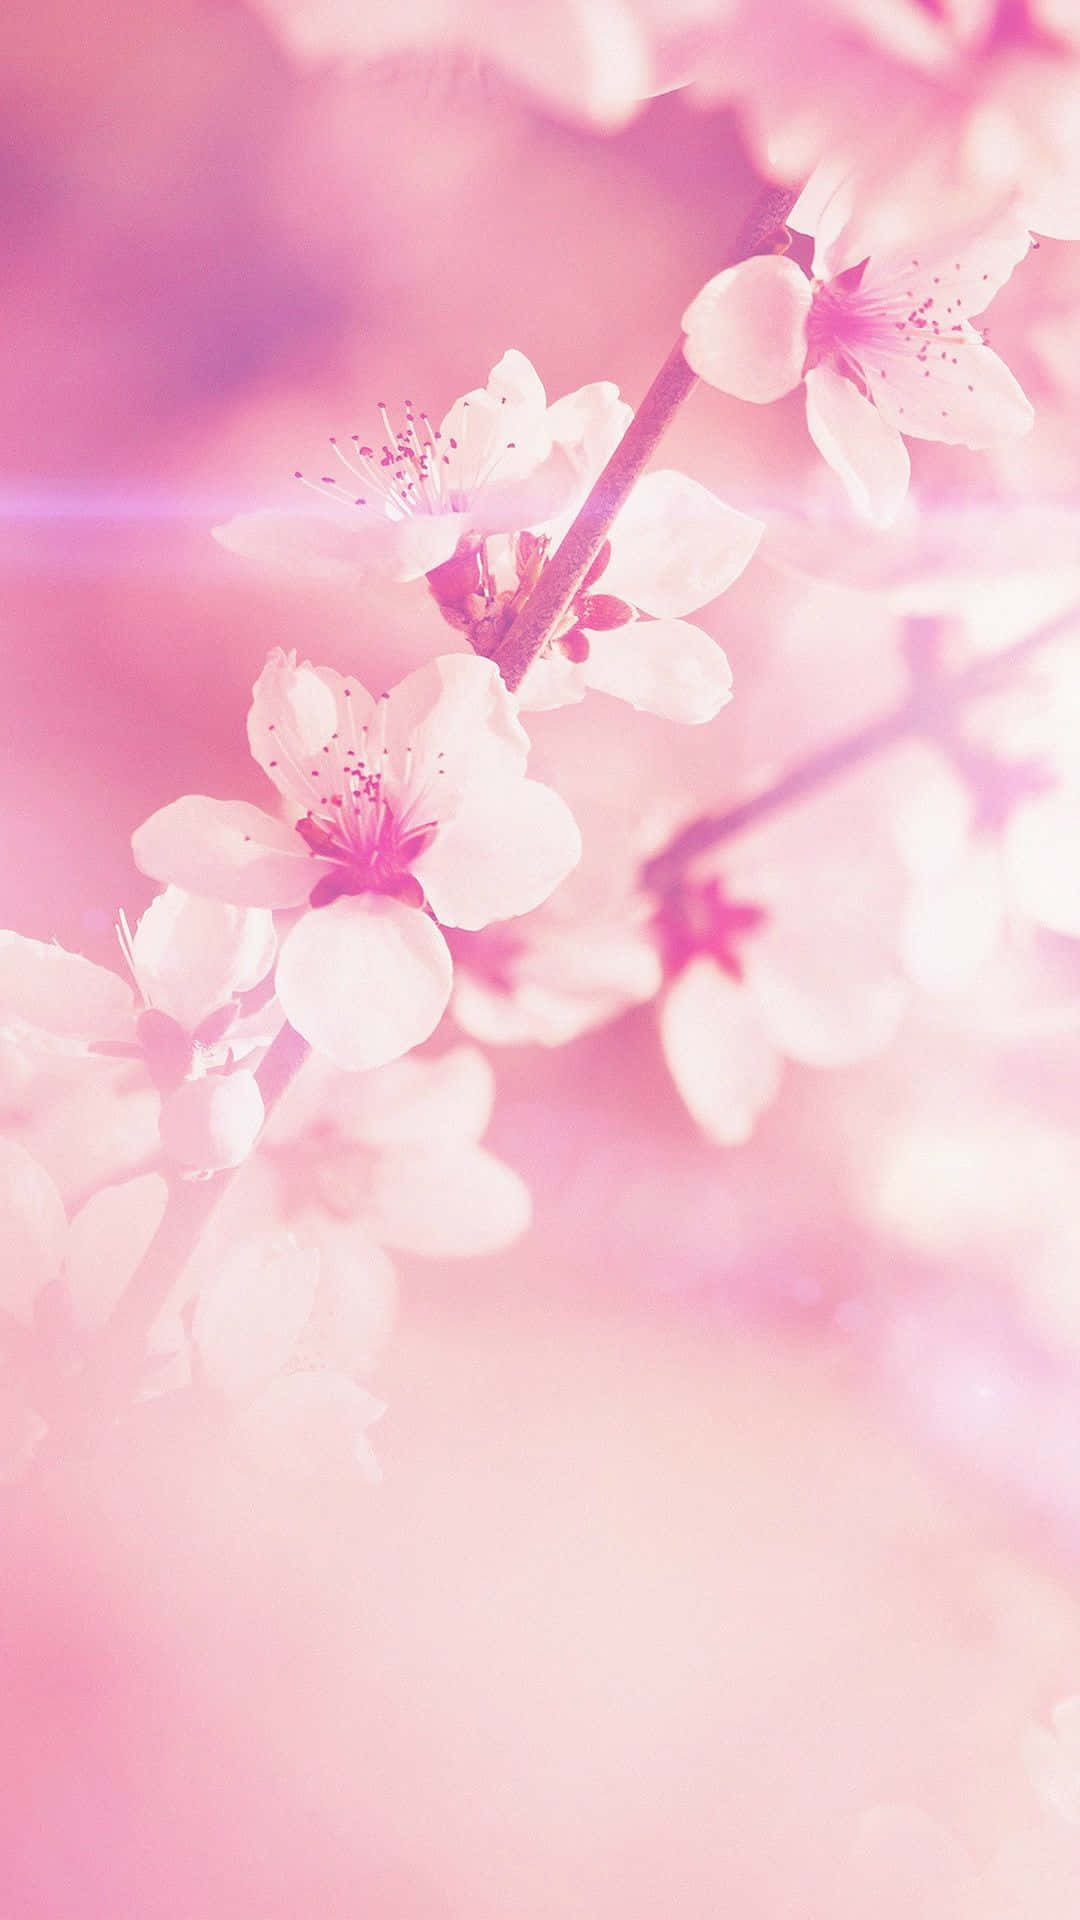 Pink Flowers On A Pink Background Wallpaper